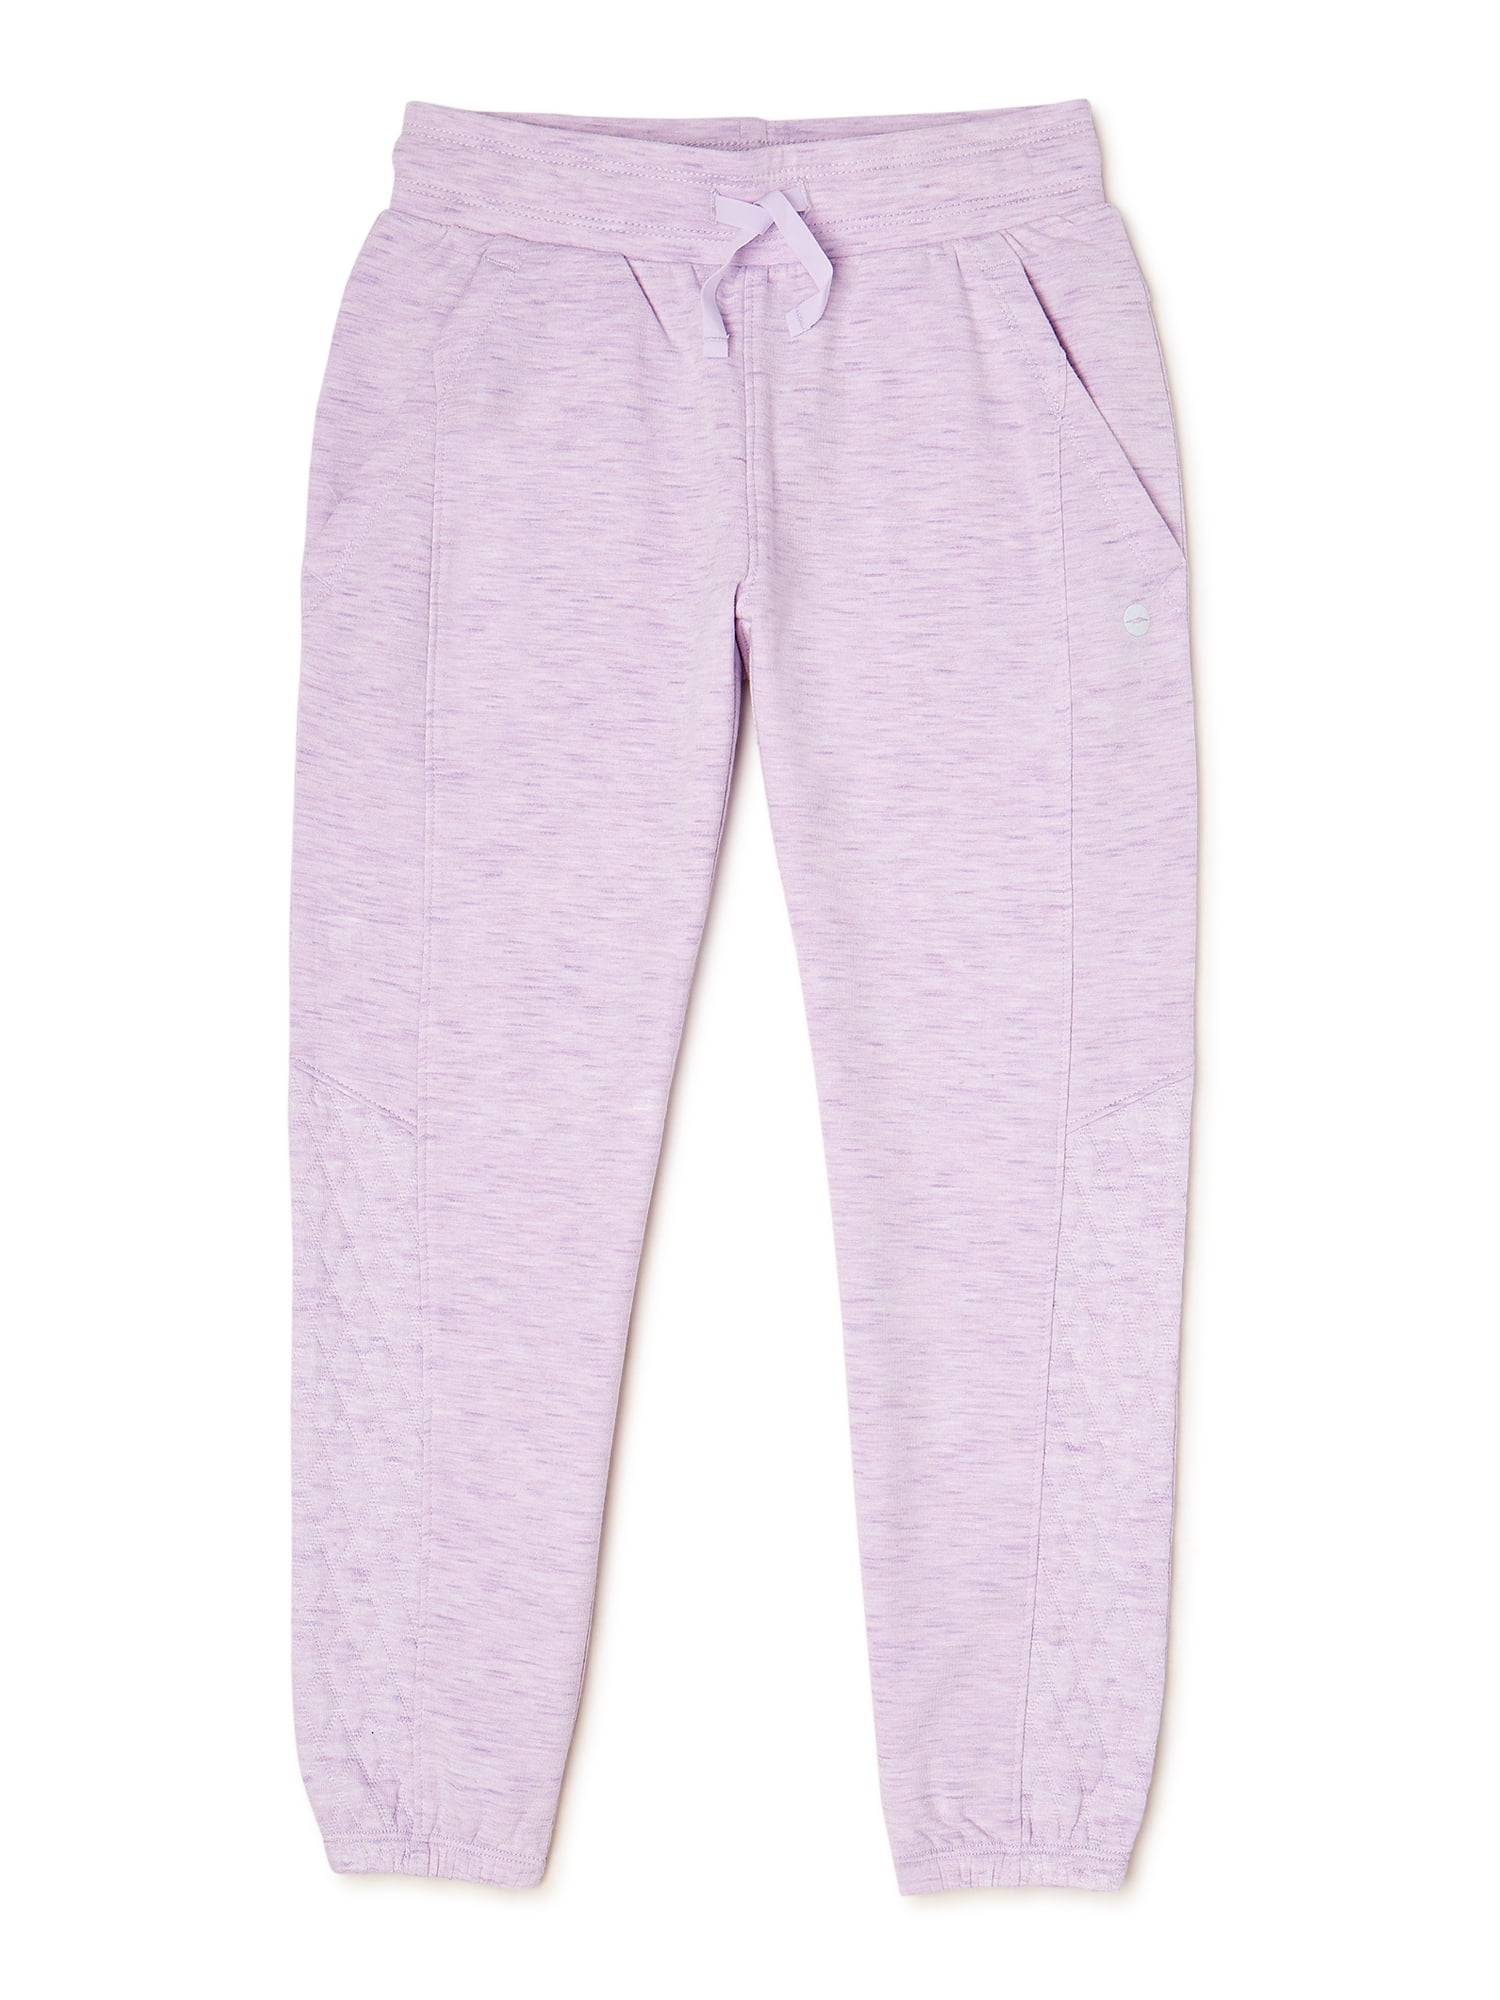 Avia Girls Quilted Joggers, Sizes 4-18 & Plus - Walmart.com